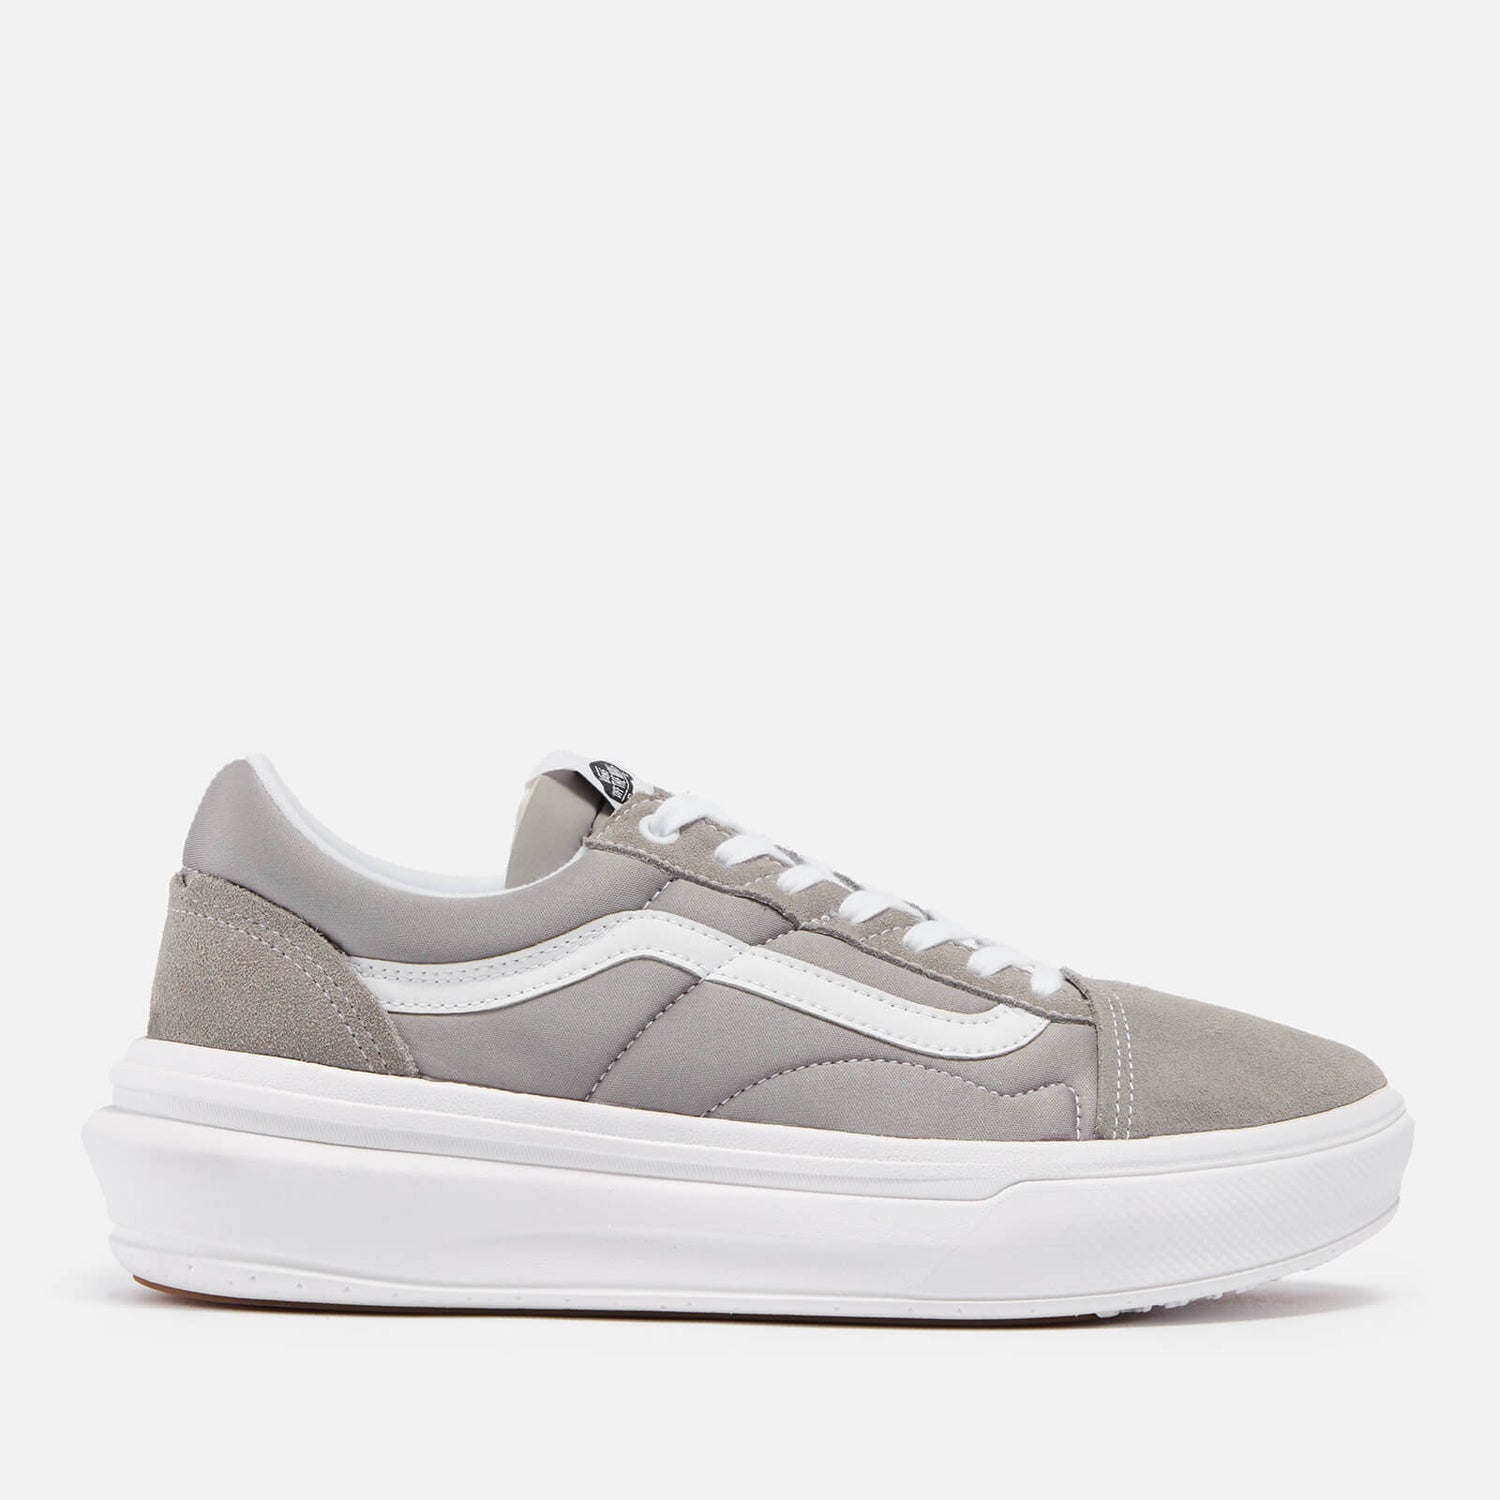 Vans Overt Old Skool Suede and Canvas Trainers - 8